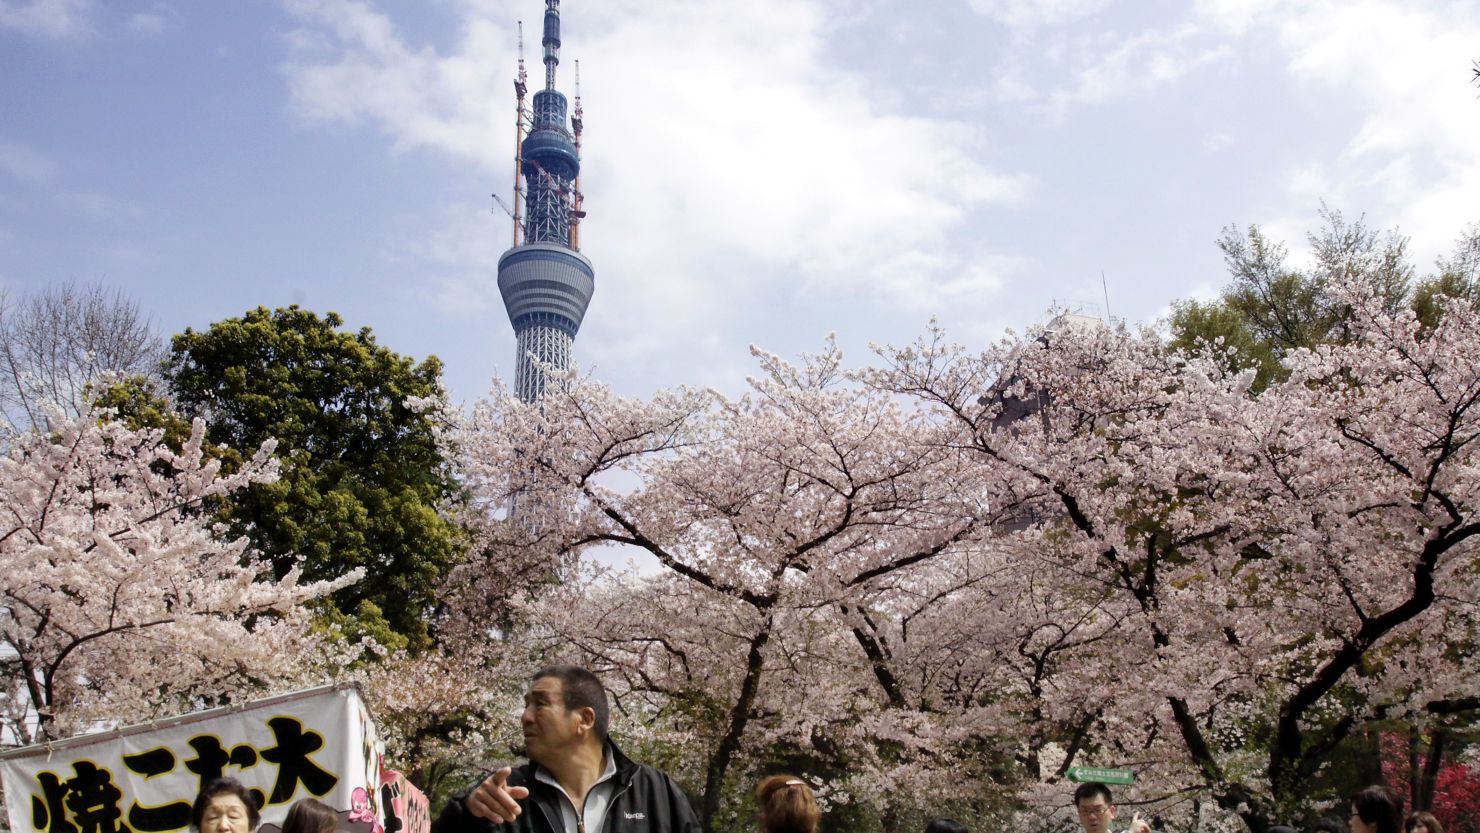 Japan's capital is now rated as the most expensive city in the world for expats, the Mercer report says.